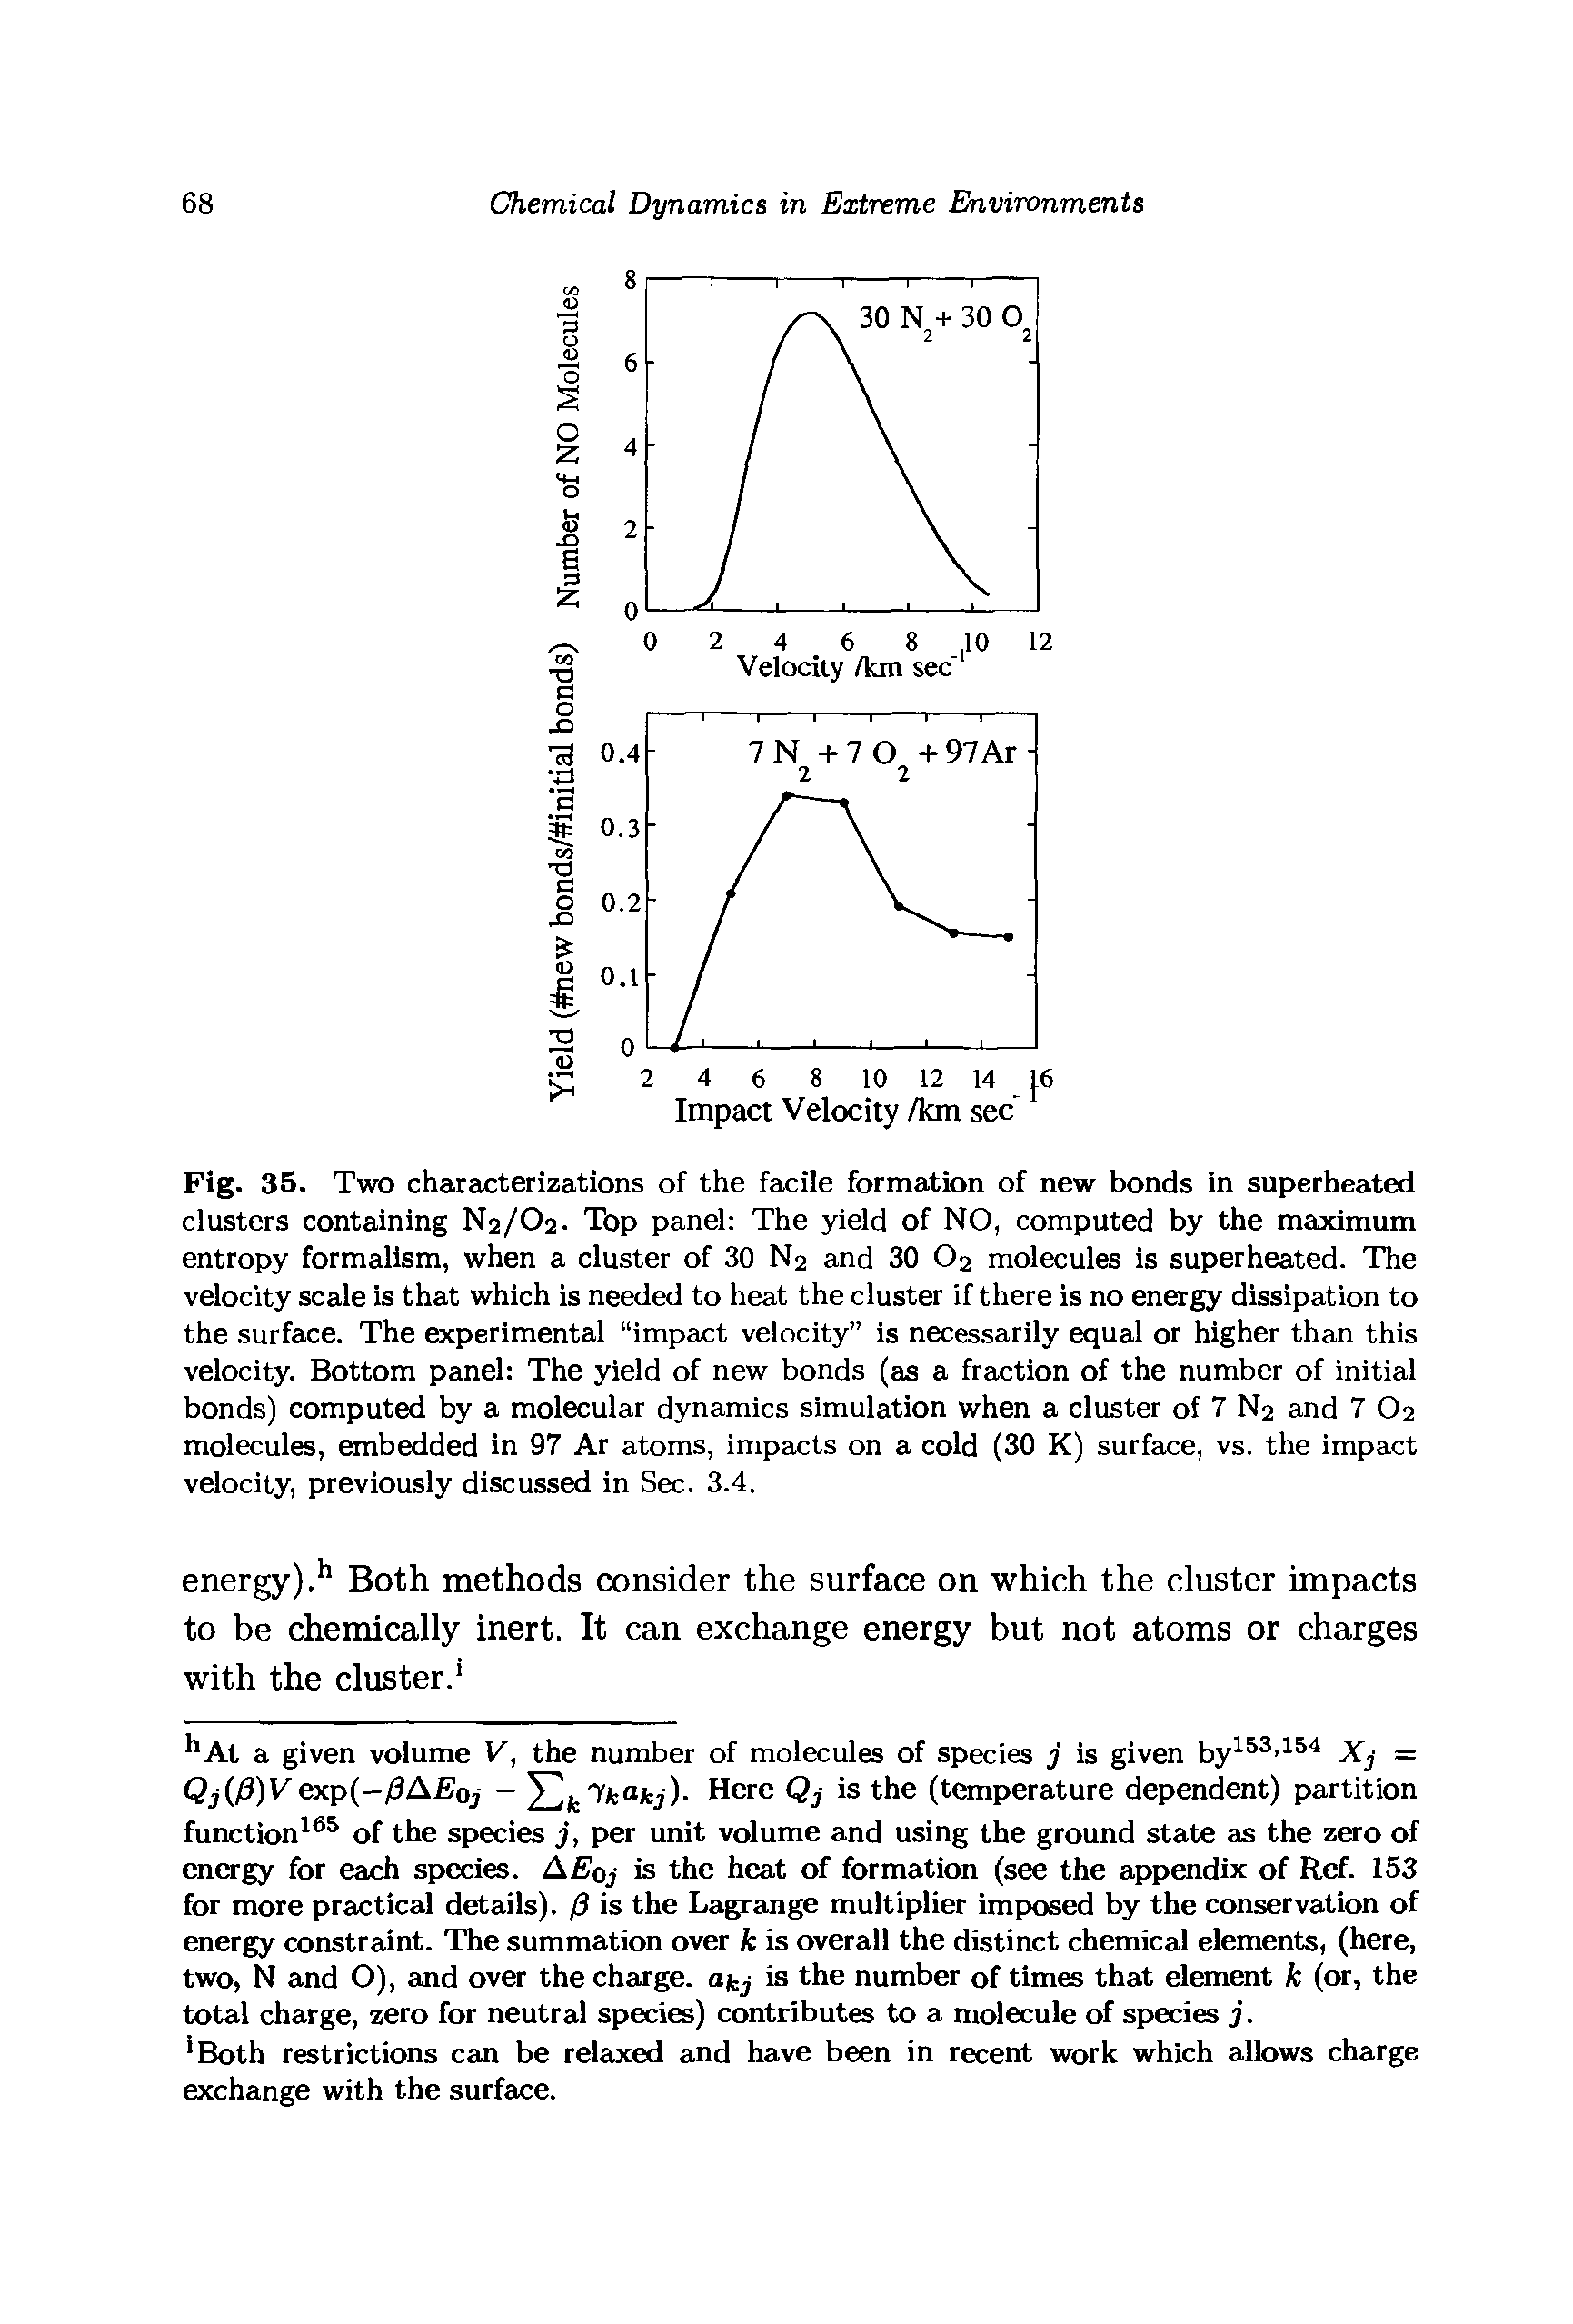 Fig. 35. Two characterizations of the facile formation of new bonds in superheated clusters containing N2/O2. Top panel The yield of NO, computed by the maximum entropy formalism, when a cluster of 30 N2 and 30 O2 molecules is superheated. The velocity scale is that which is needed to heat the cluster if there is no energy dissipation to the surface. The experimental impact velocity is necessarily equal or higher than this velocity. Bottom panel The yield of new bonds (as a fraction of the number of initial bonds) computed by a molecular dynamics simulation when a cluster of 7 N2 and 7 O2 molecules, embedded in 97 Ar atoms, impacts on a cold (30 K) surface, vs. the impact velocity, previously discussed in Sec. 3.4.